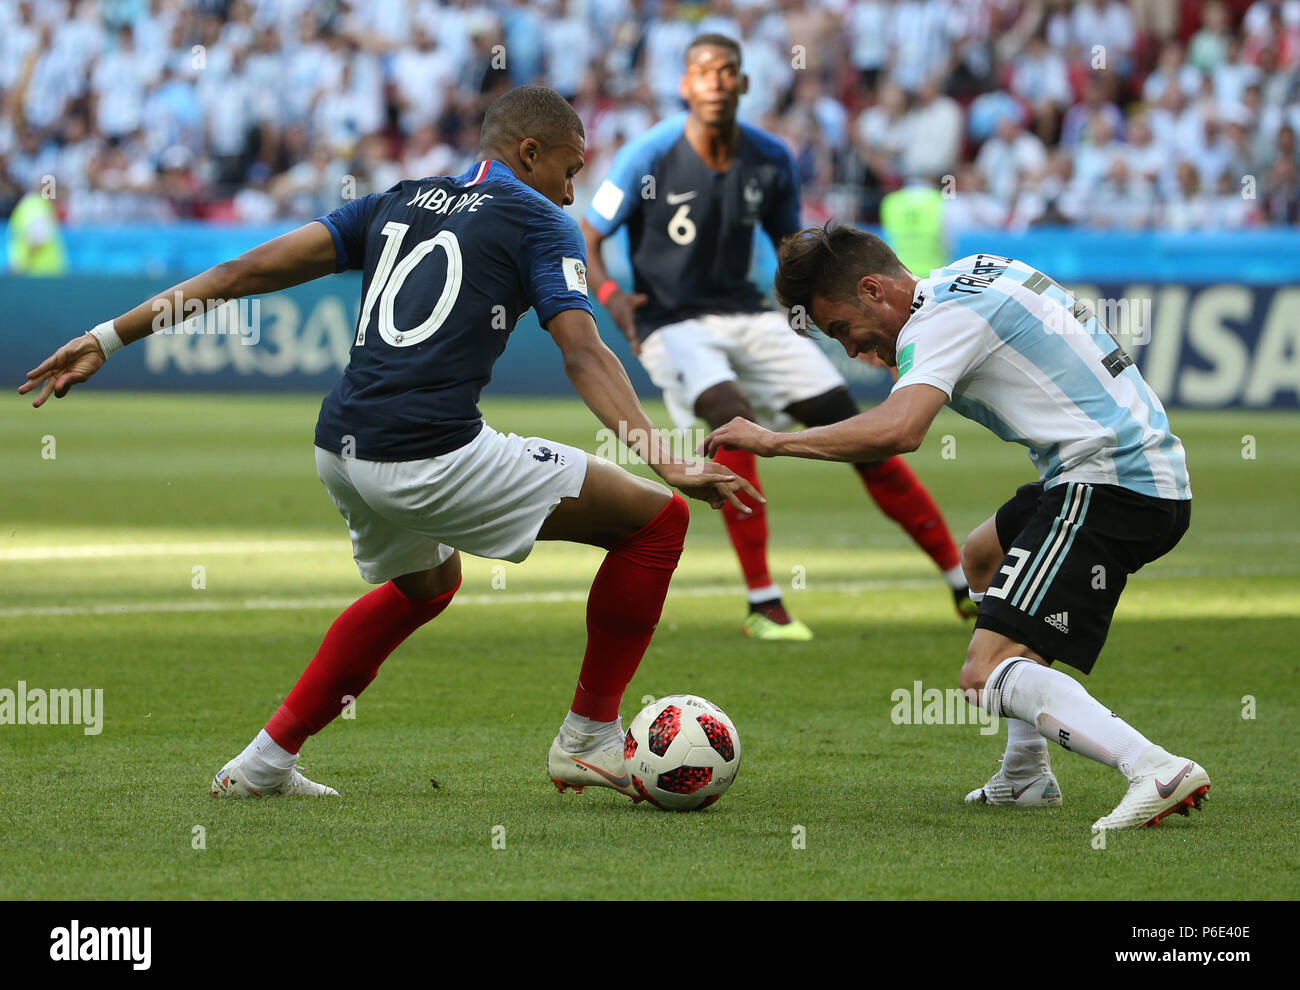 (180630) -- KAZAN, June 30, 2018 (Xinhua) -- Kylian Mbappe (L) of France vies with Nicolas Tagliafico (R) of Argentina during the 2018 FIFA World Cup round of 16 match between France and Argentina in Kazan, Russia, June 30, 2018. (Xinhua/Li Ming) Stock Photo